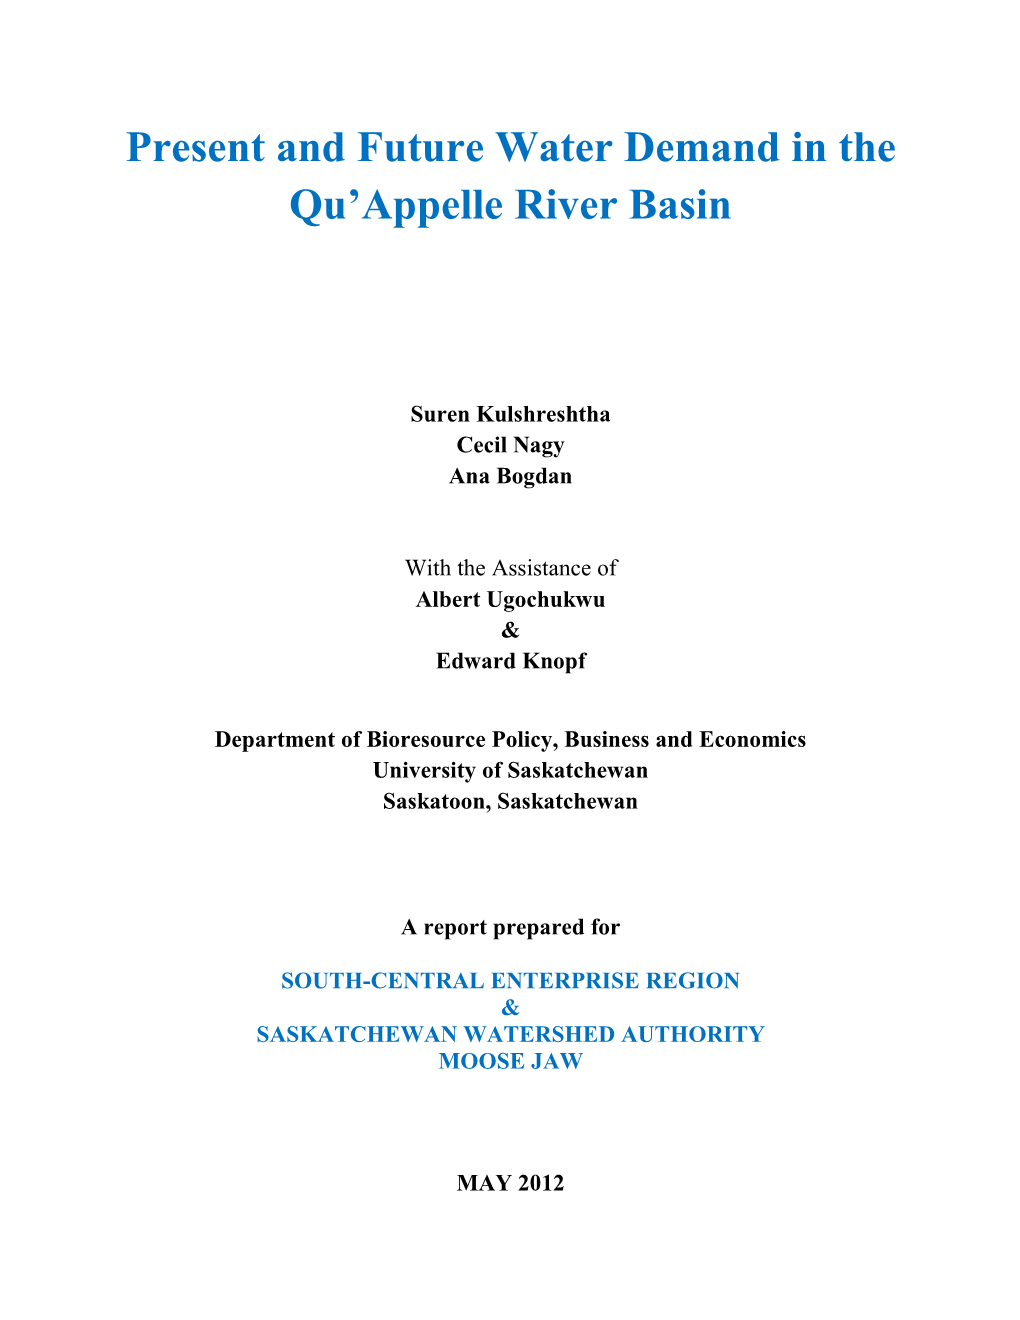 Present and Future Water Demand in the Qu'appelle River Basin